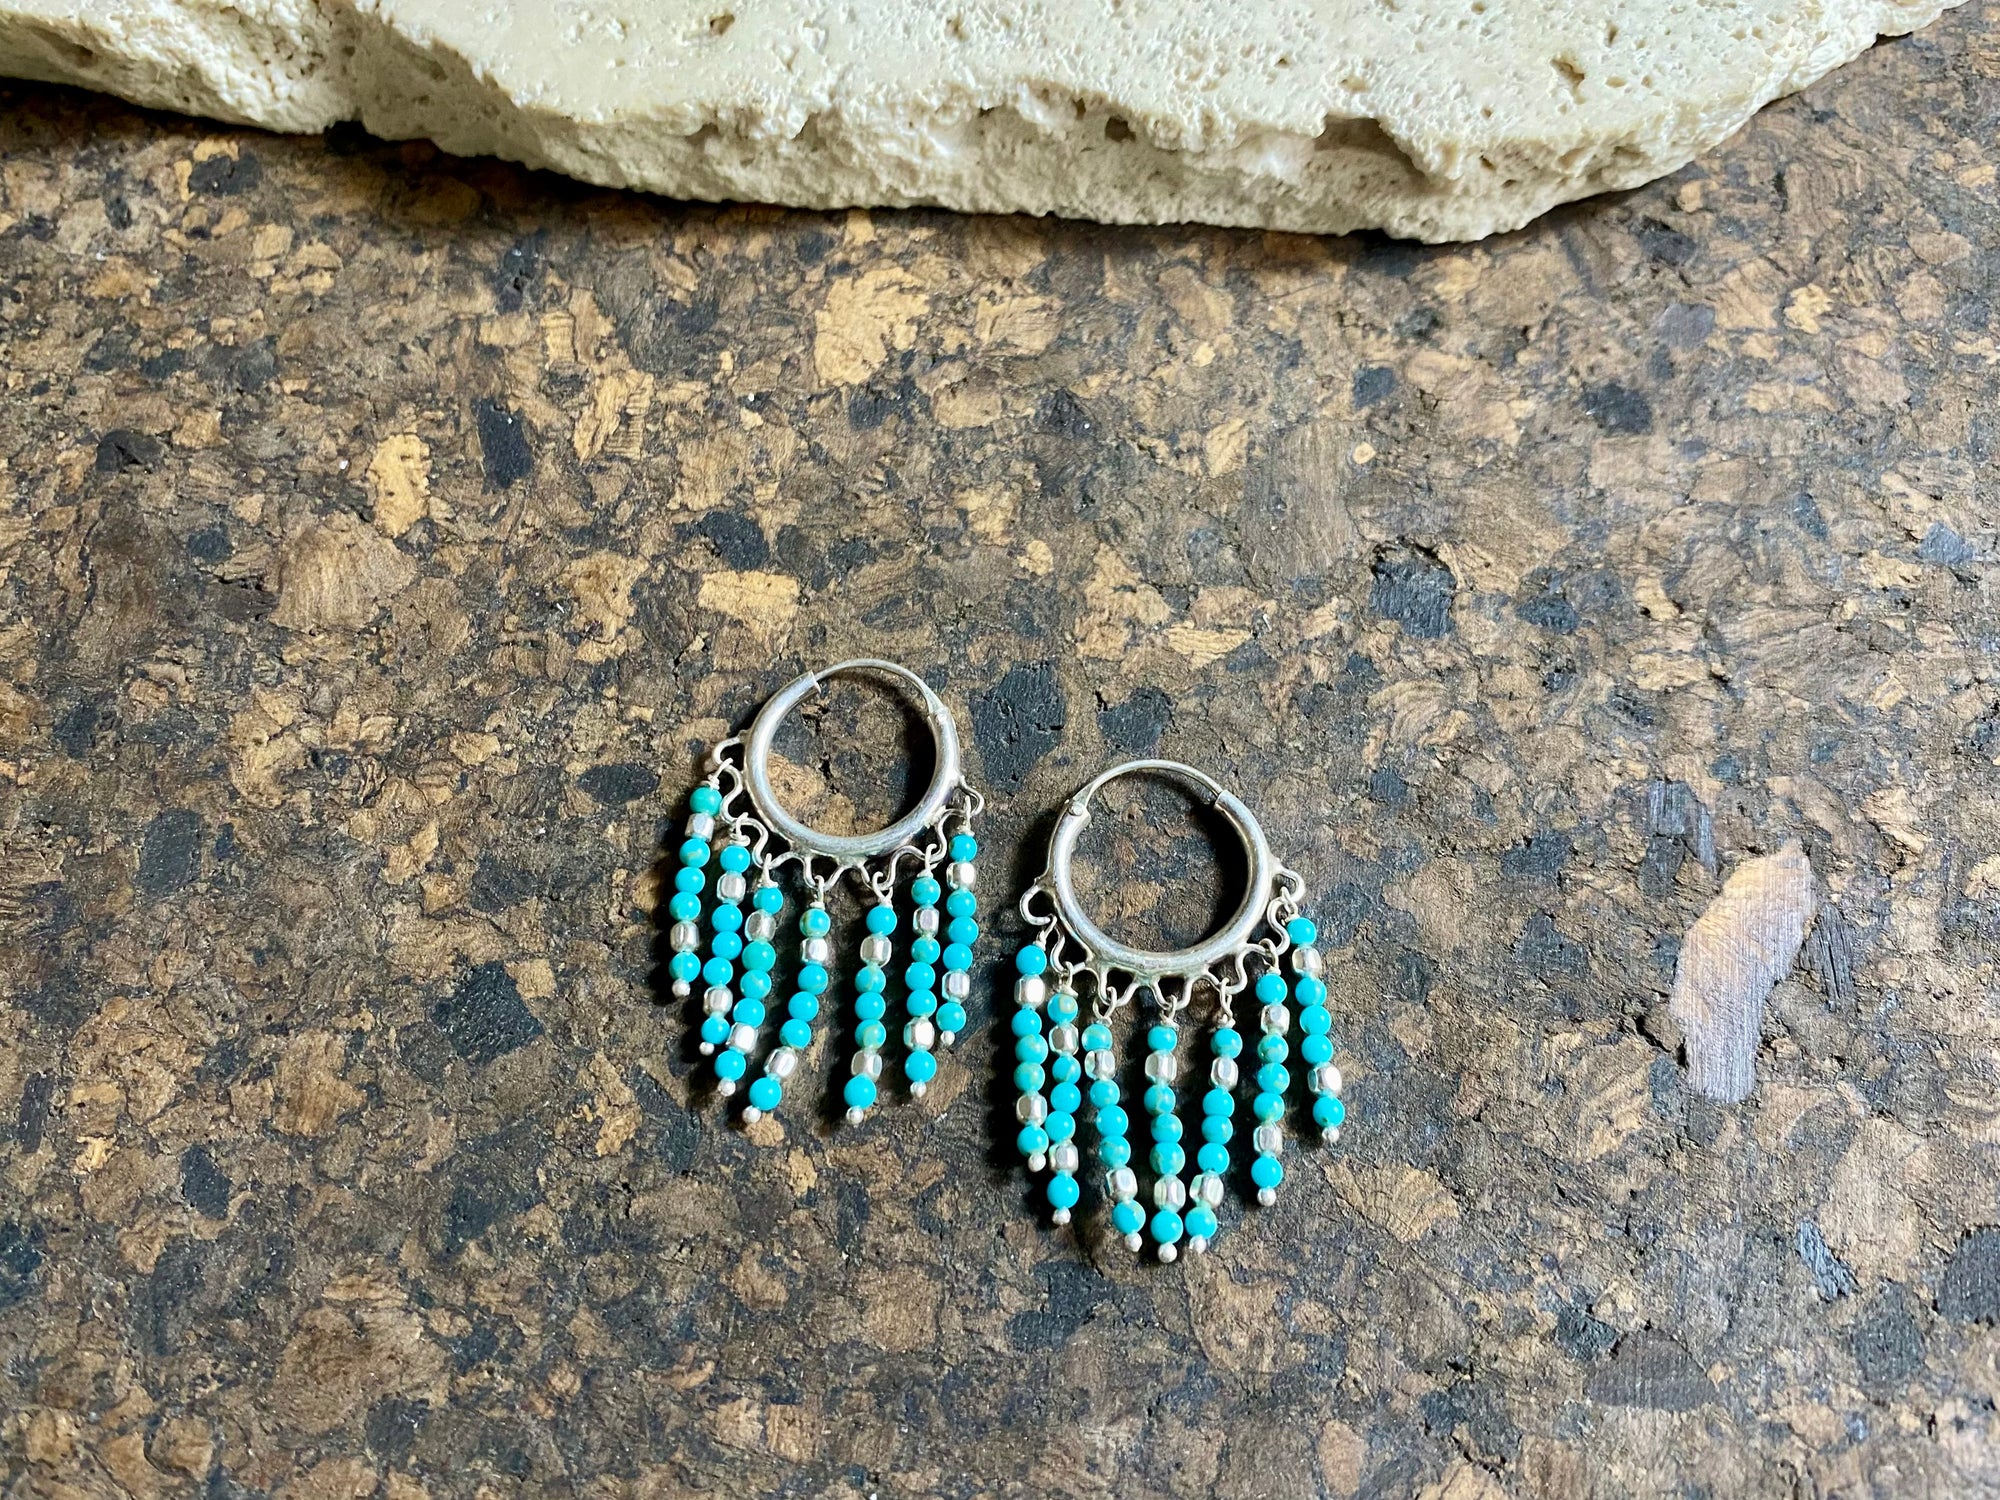 Our handmade fringed southwest-style turquoise earrings are crafted from Sleeping Beauty turquoise and handmade silver bead detailing. Sterling silver hoops complete the look. These earrings are designed to sit with the fringe facing parallel to the face. Measurements: Length 3.7 cm, 2 cm diameter